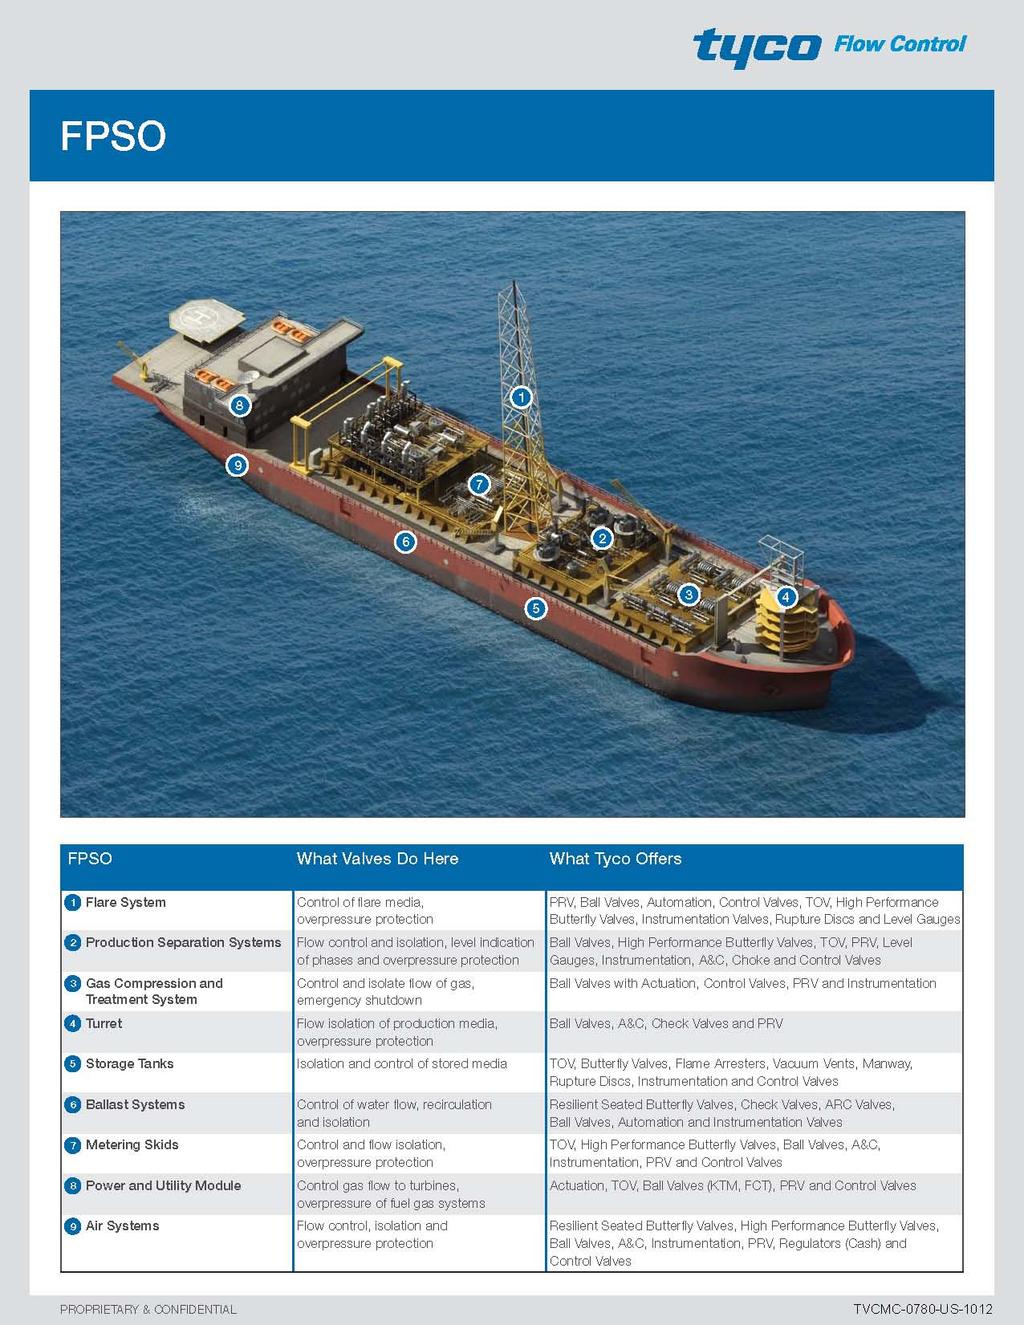 (FPSO) Refinery Oil Sands Production A